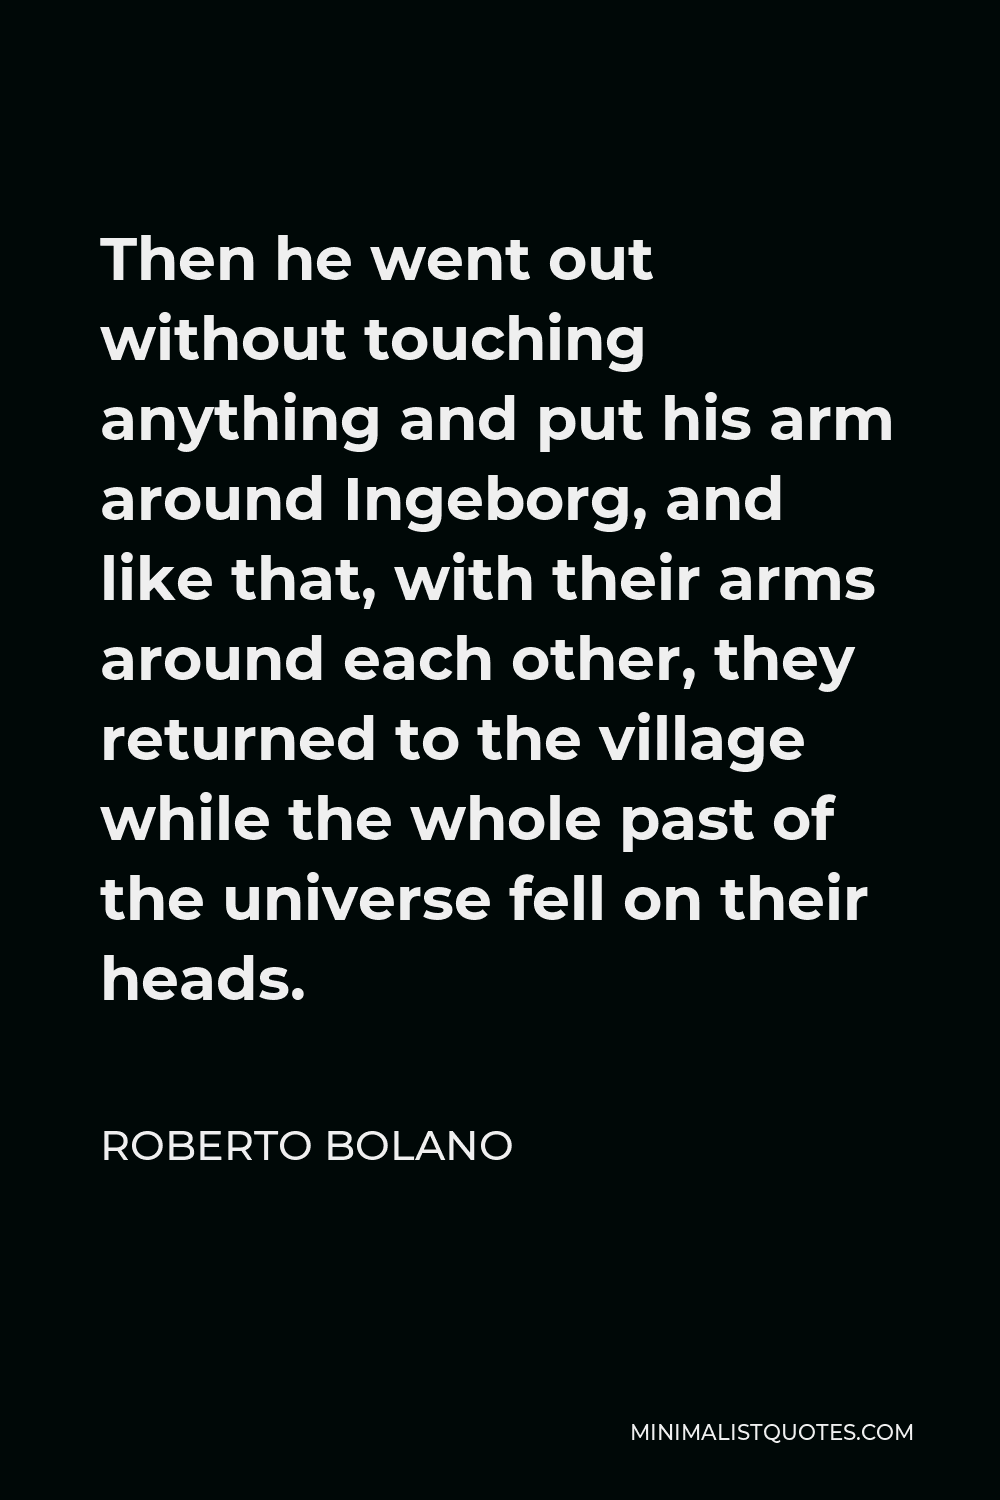 Roberto Bolano Quote - Then he went out without touching anything and put his arm around Ingeborg, and like that, with their arms around each other, they returned to the village while the whole past of the universe fell on their heads.